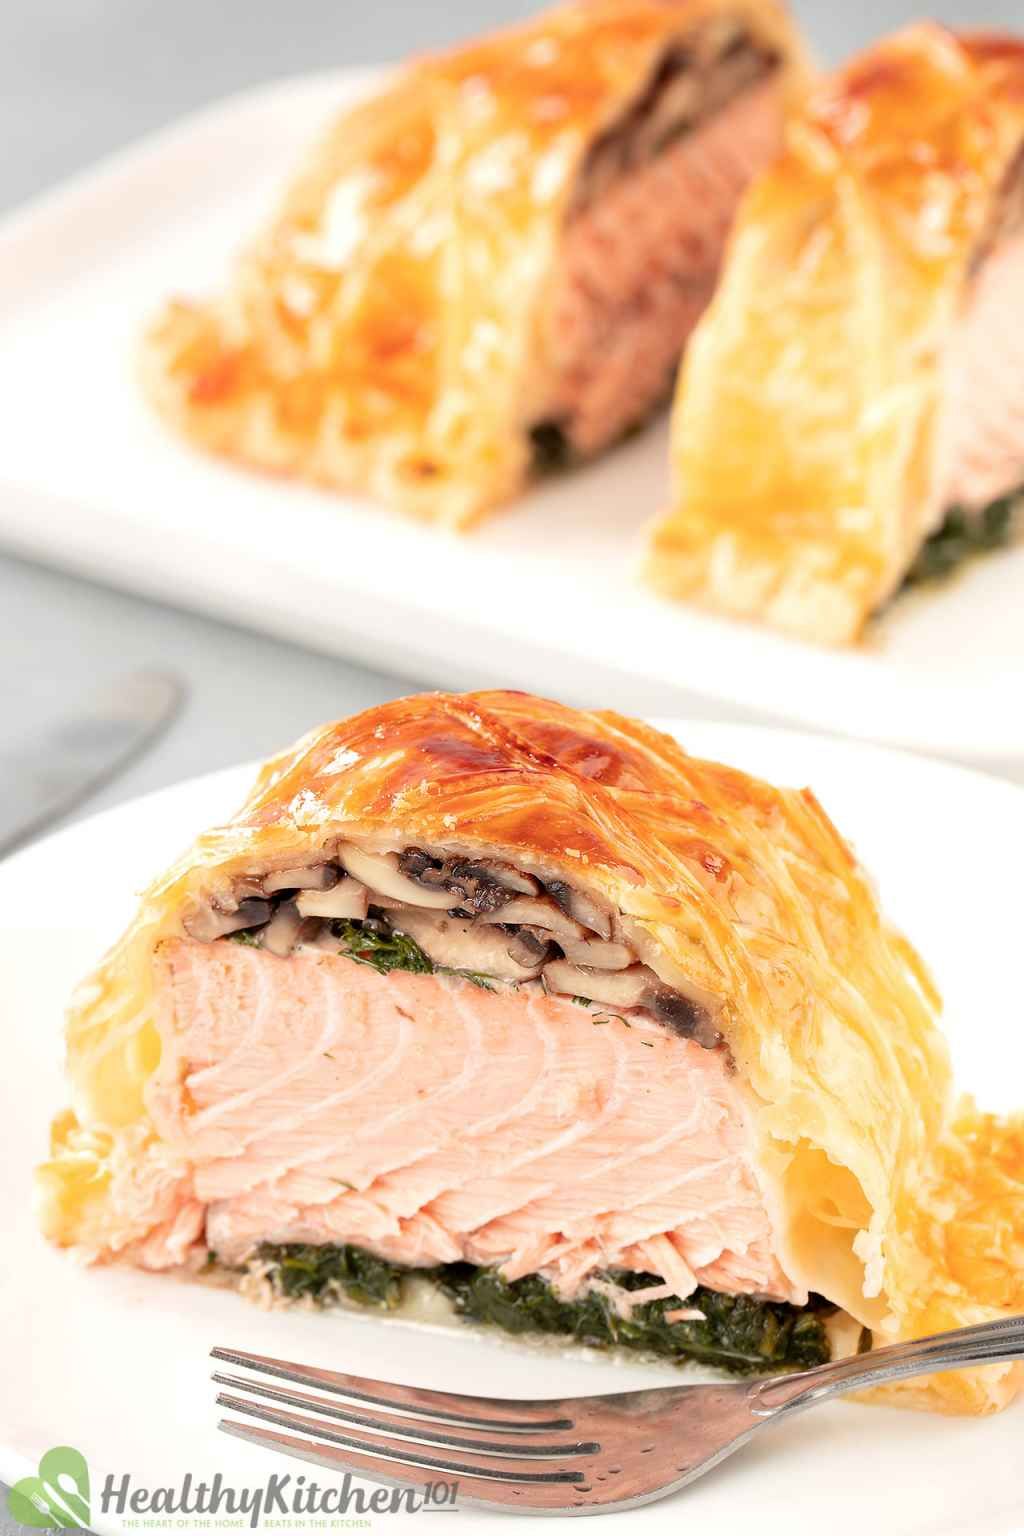 Salmon en Croute Recipe - An Easy Restaurant-Quality Dish at Home